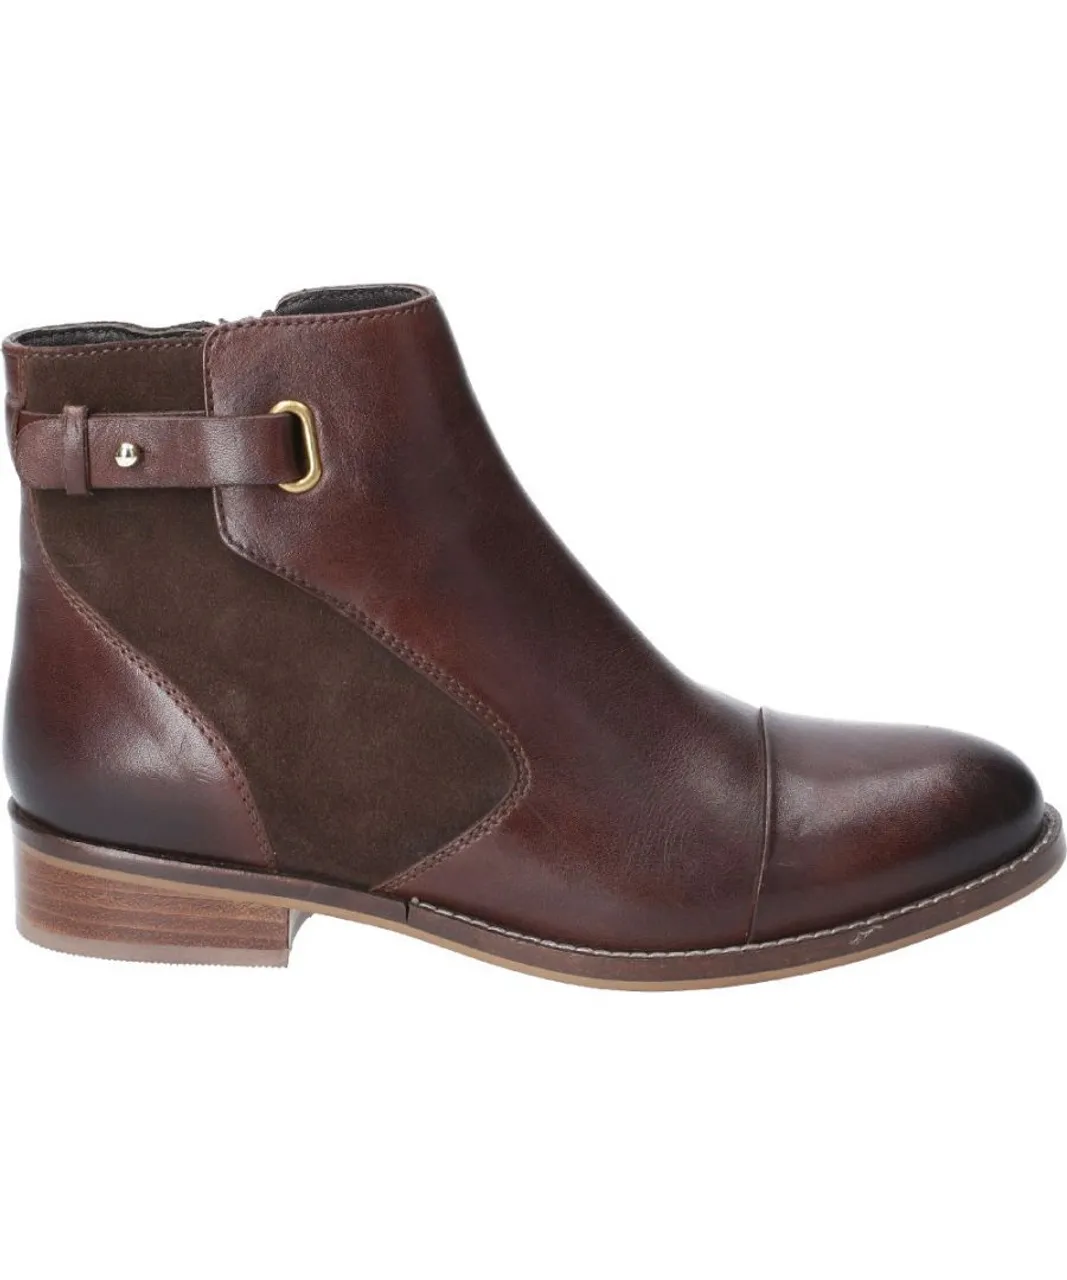 Hush Puppies Womens Hollie Zip Up Leather Ankle Boots - Brown